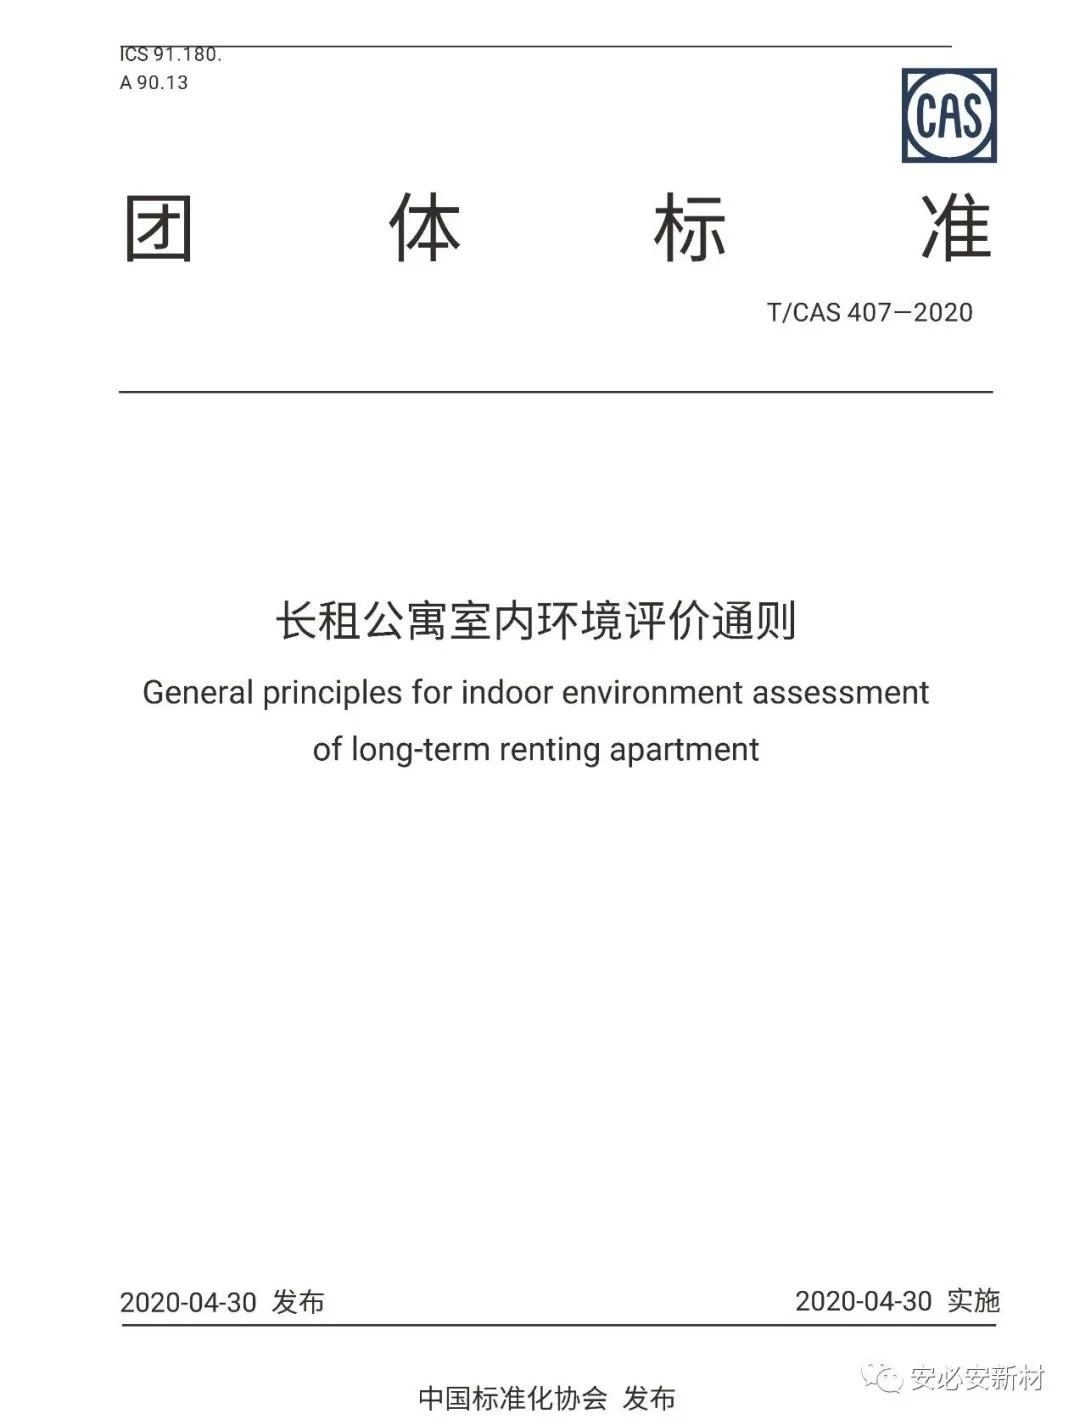 General Rules for Indoor Environmental Assessment of Long-Term Rental Apartments, which was edited by Dansn, was officially released.